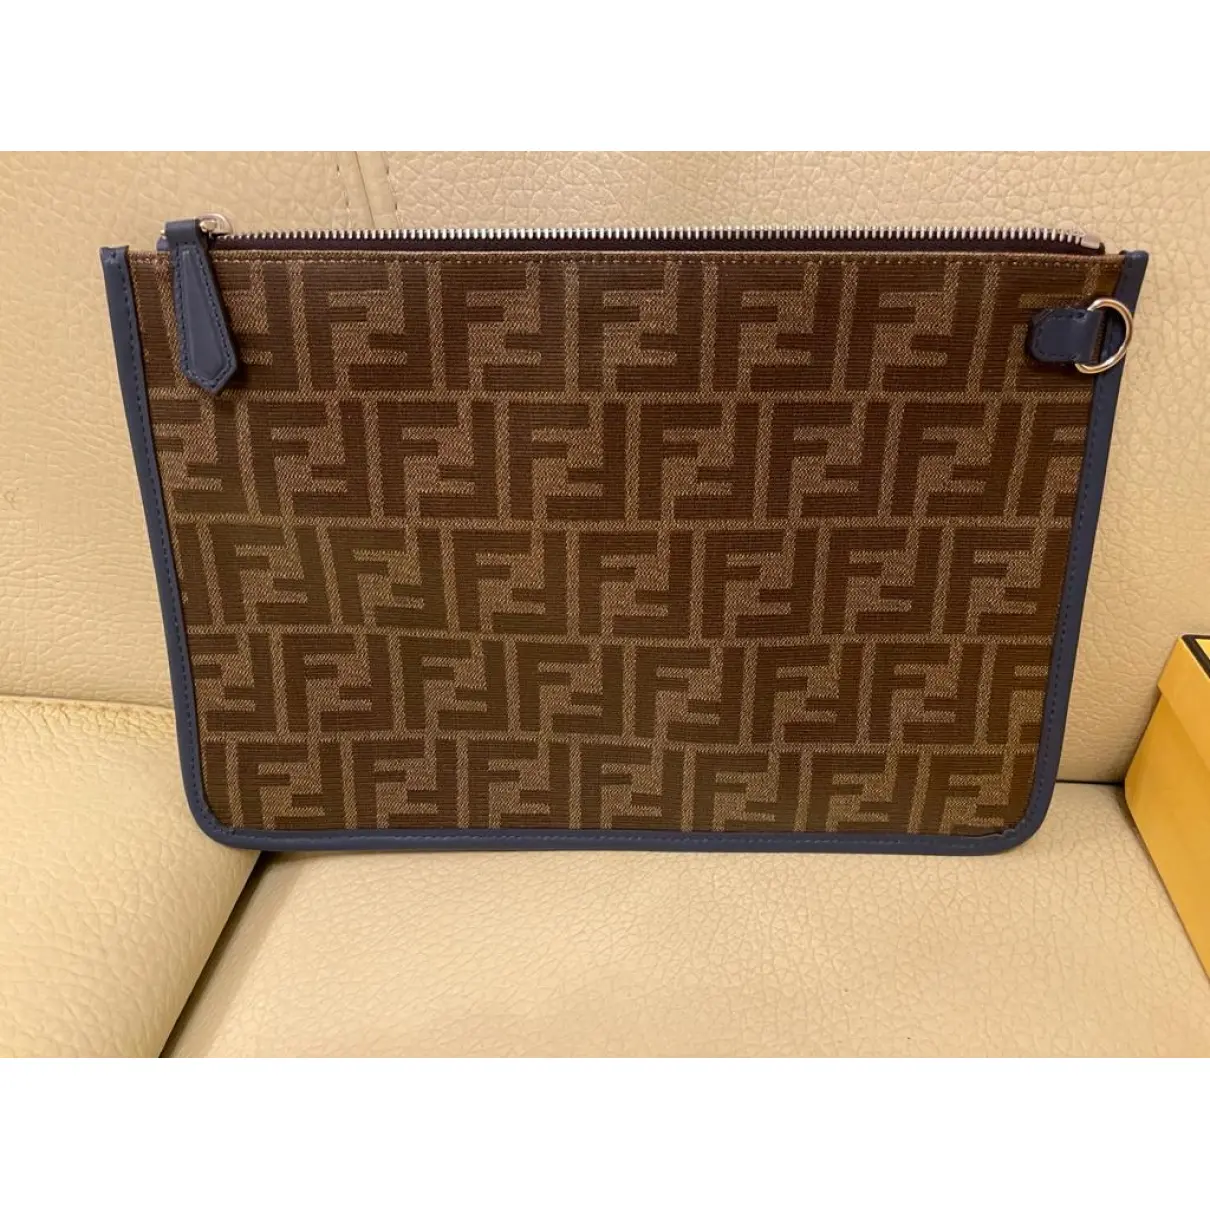 Buy Fendi Double F patent leather clutch bag online